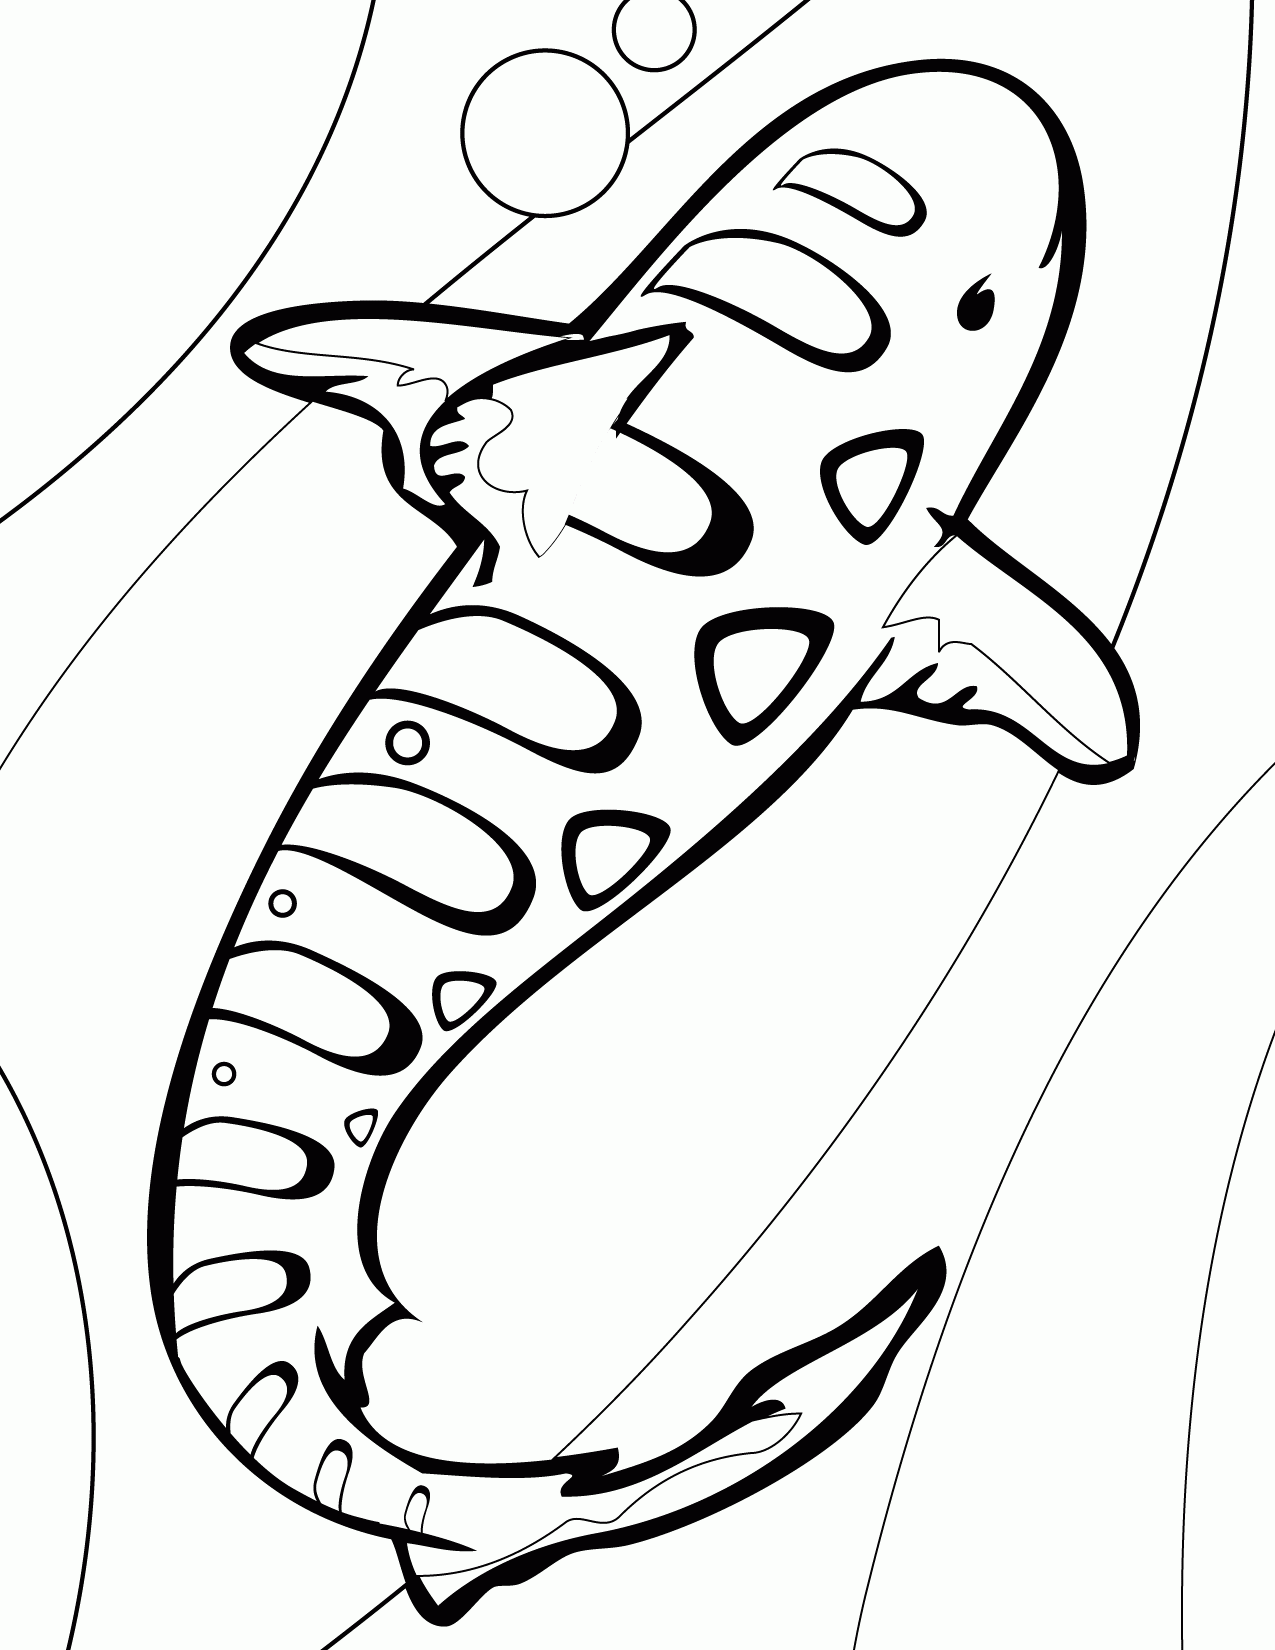 Sharks Coloring Pages - Handipoints